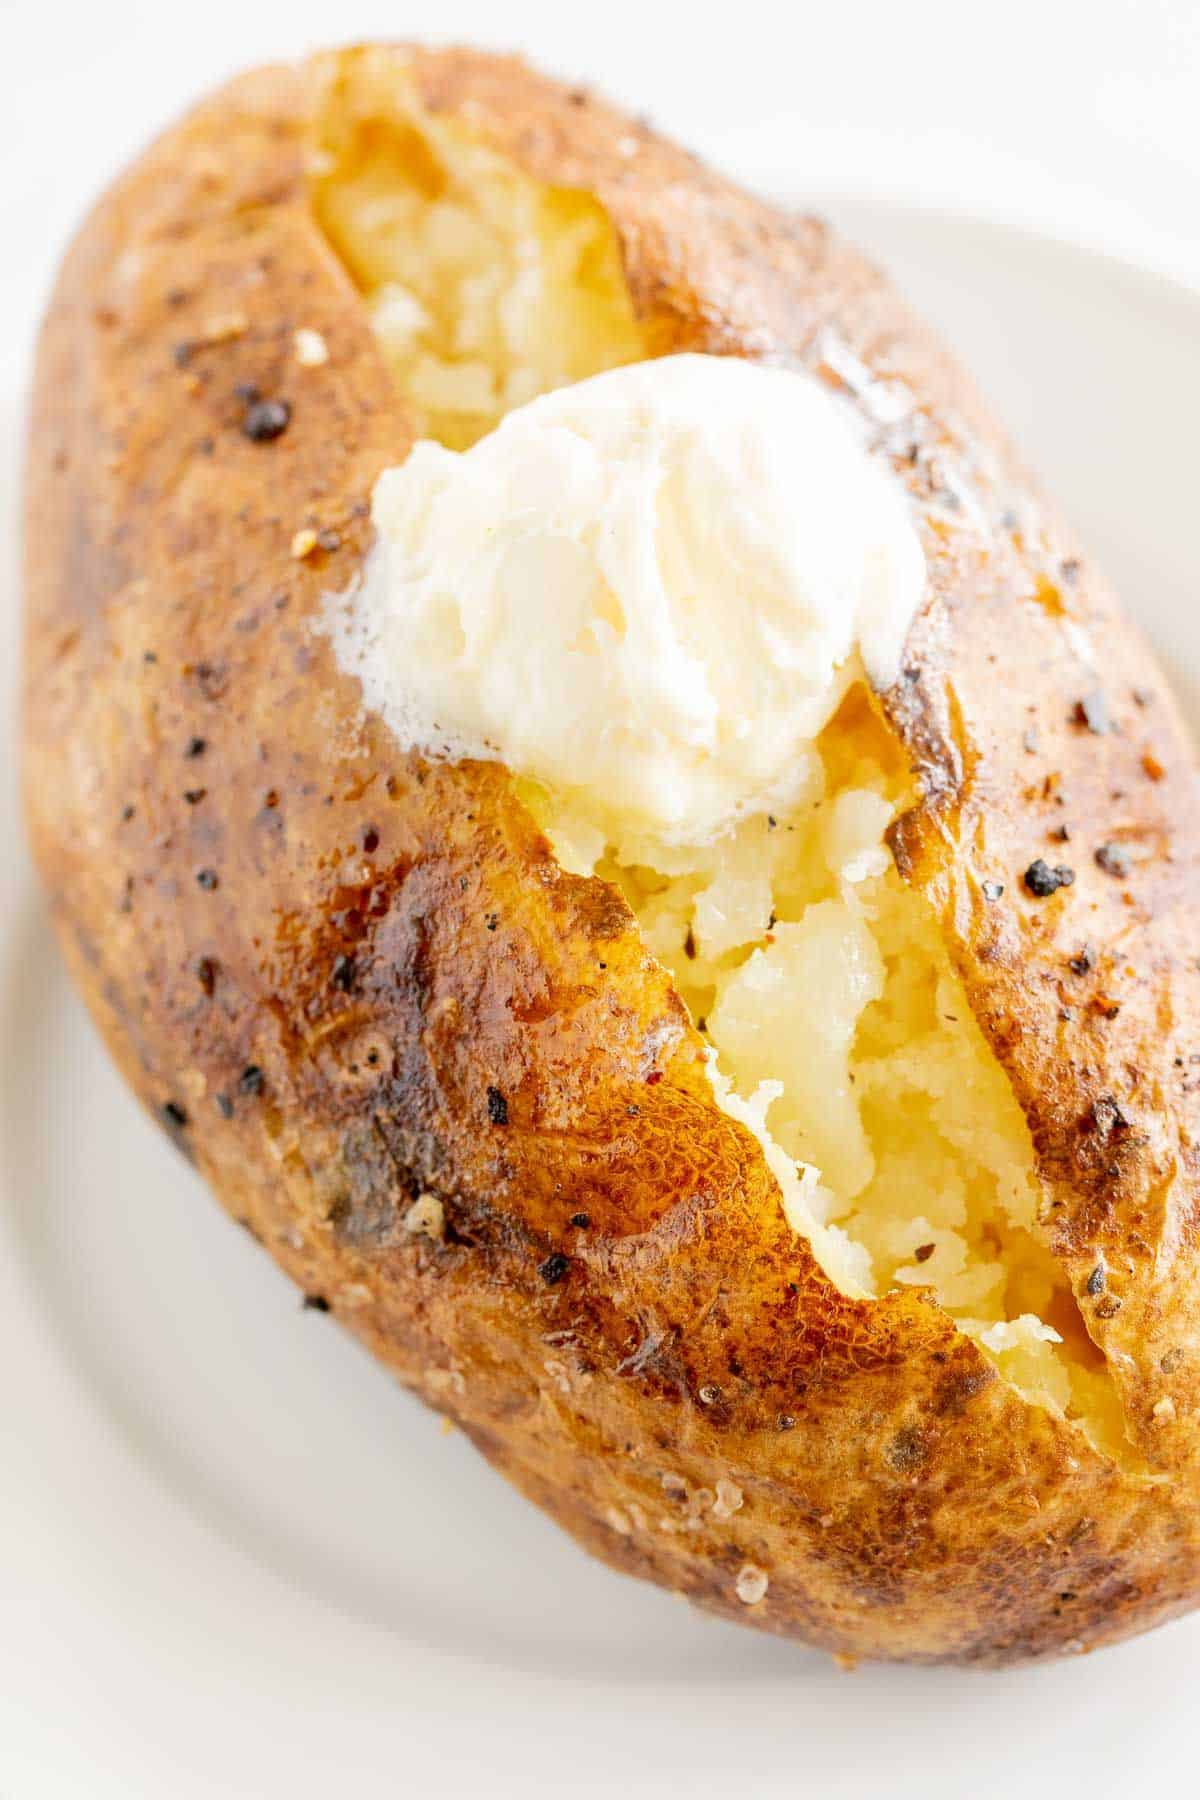 A single grilled baked potato on a white plate, topped with butter and sour cream.